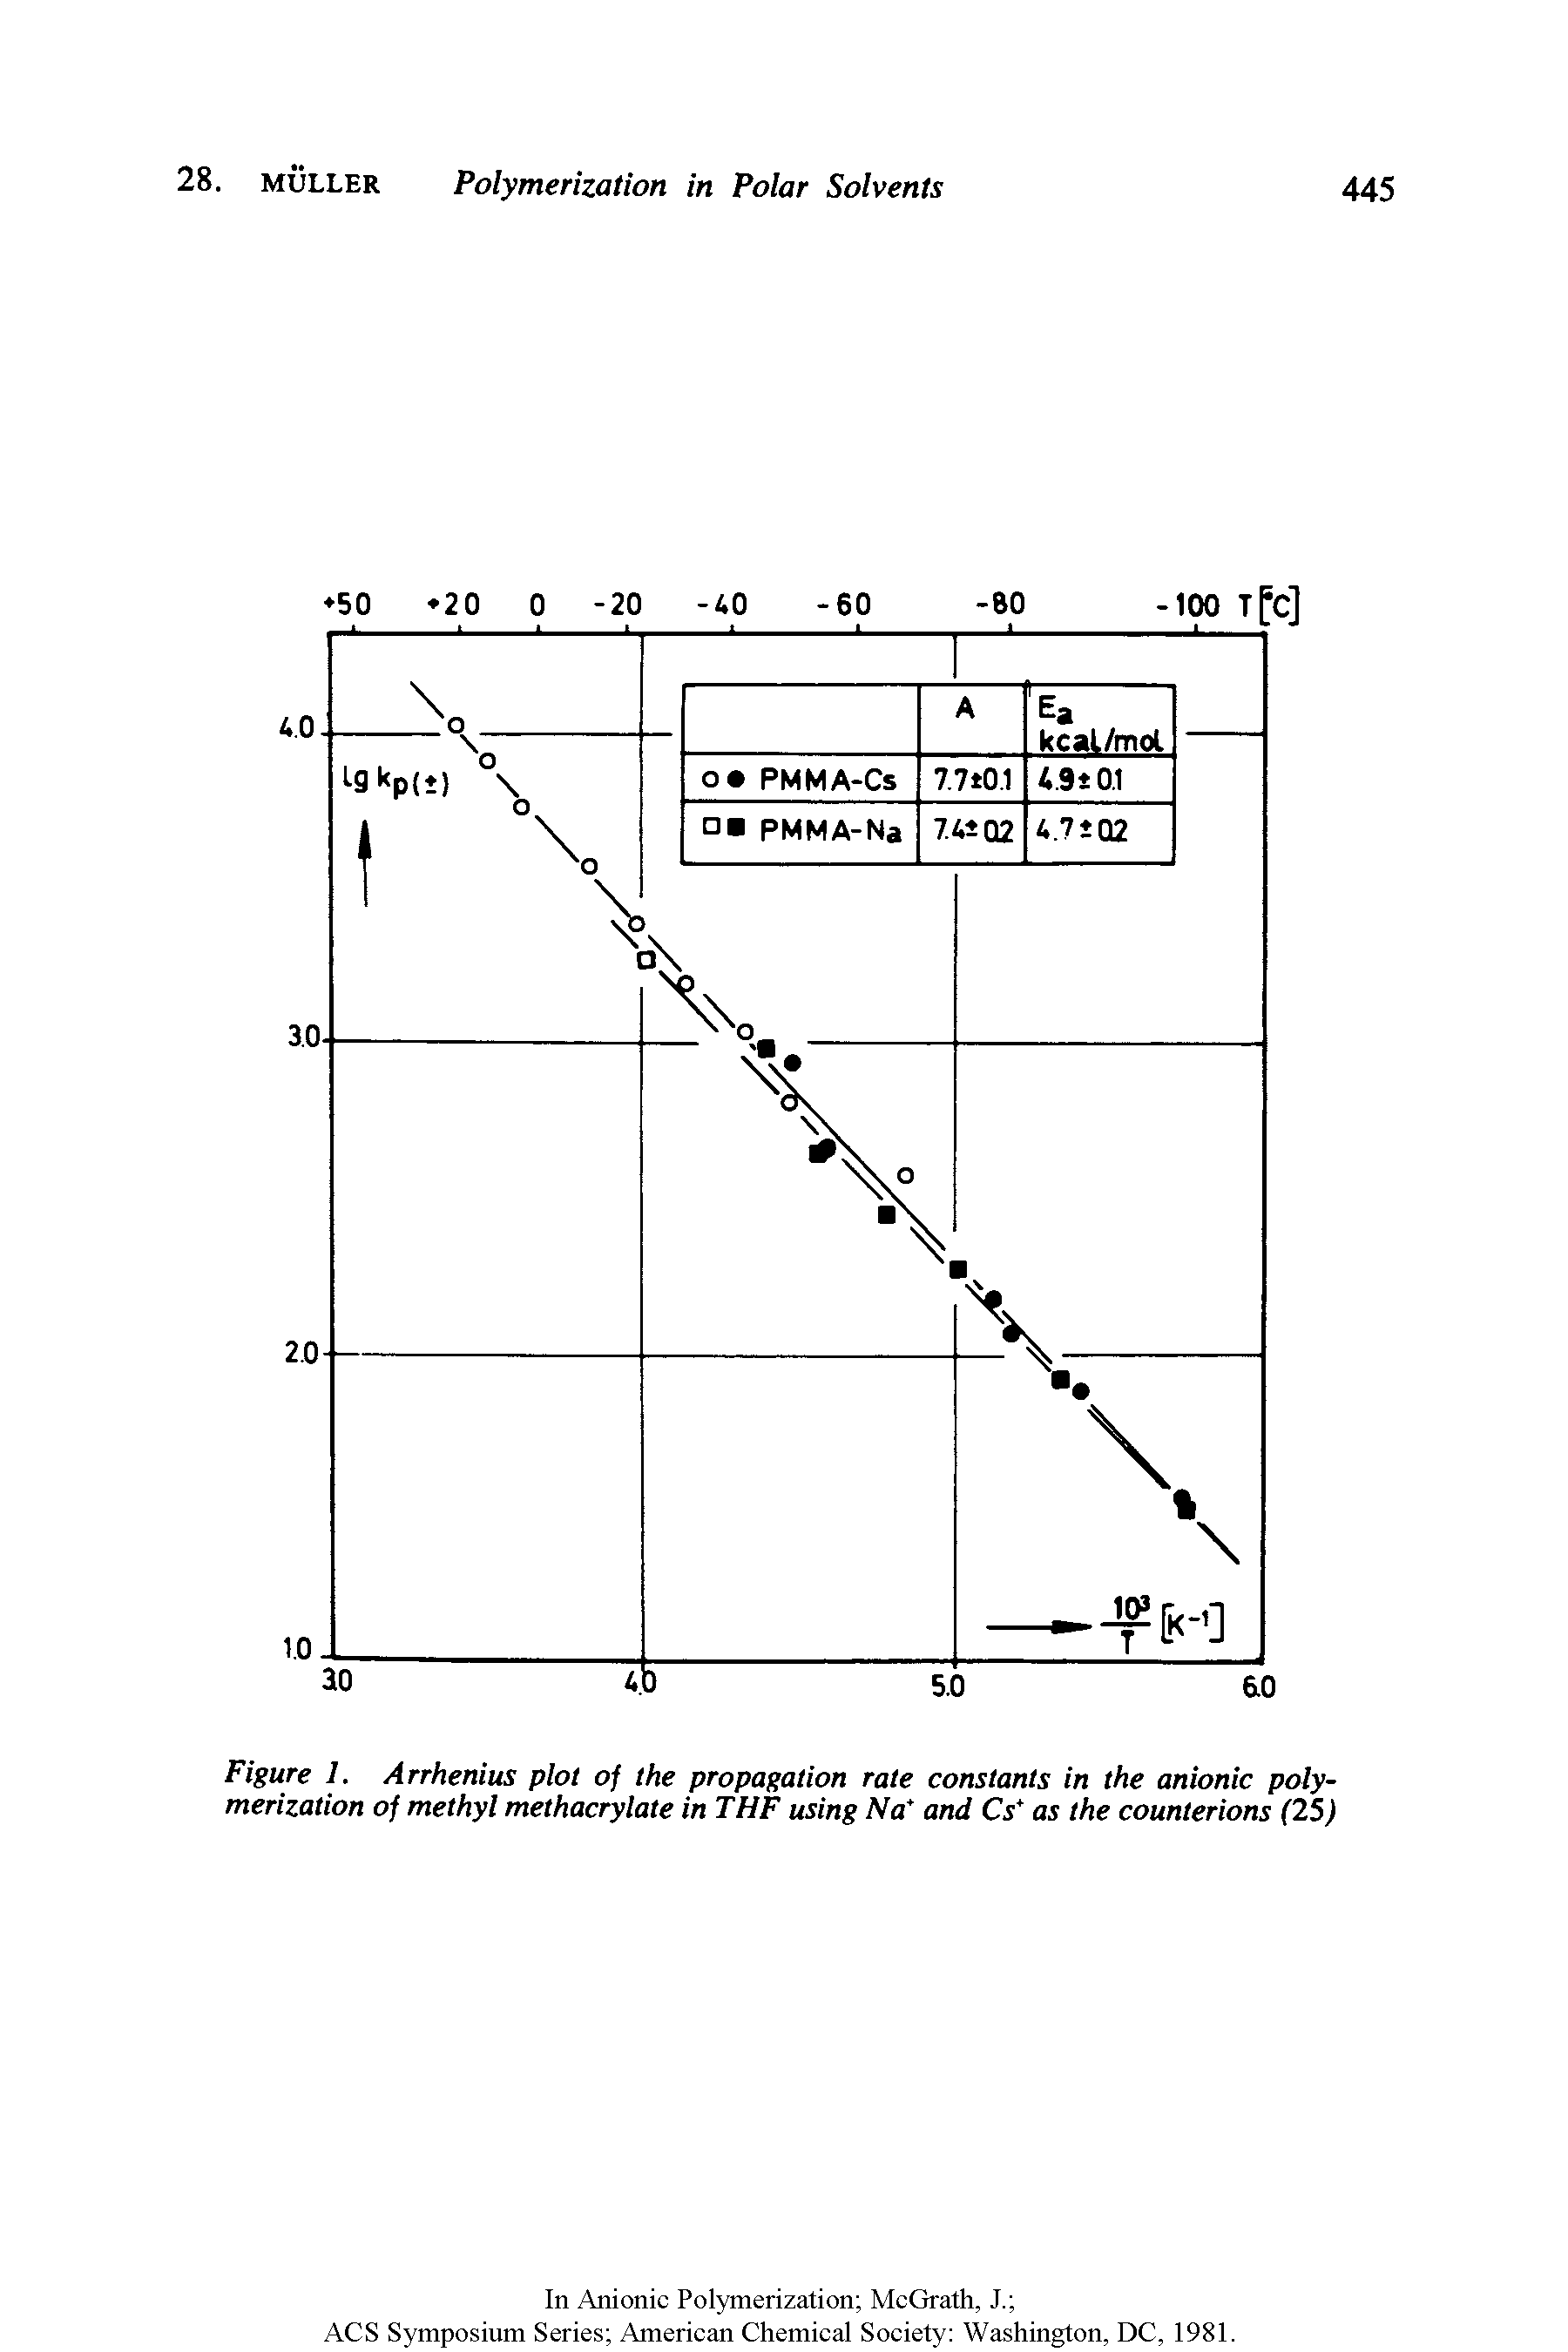 Figure 1. Arrhenius plot of the propagation rate constants in the anionic polymerization of methyl methacrylate in THF using Na and Cs+ as the counterions (25)...